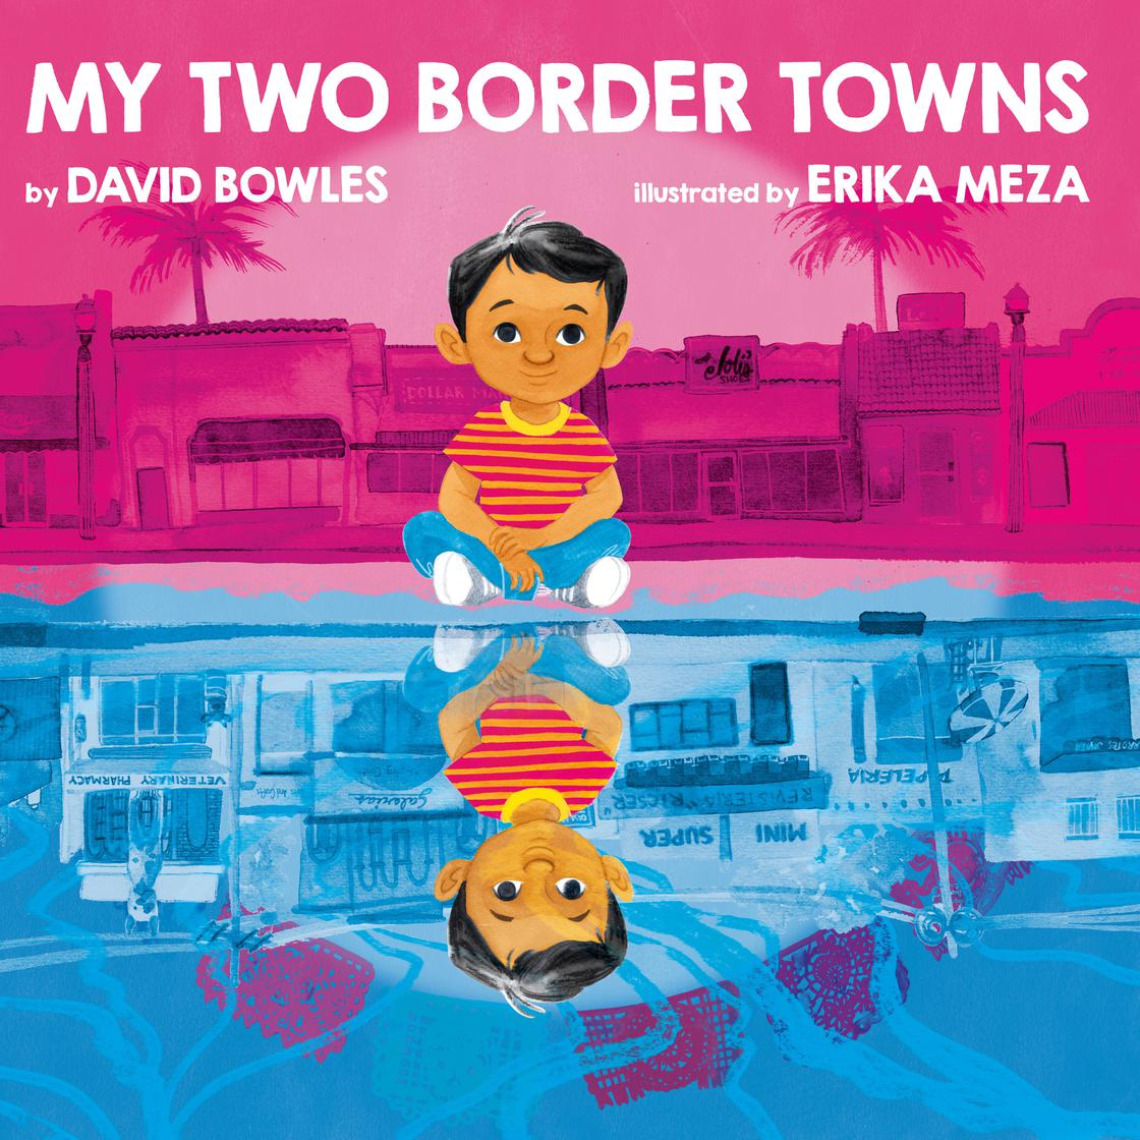 "My Two Border Towns" book cover.